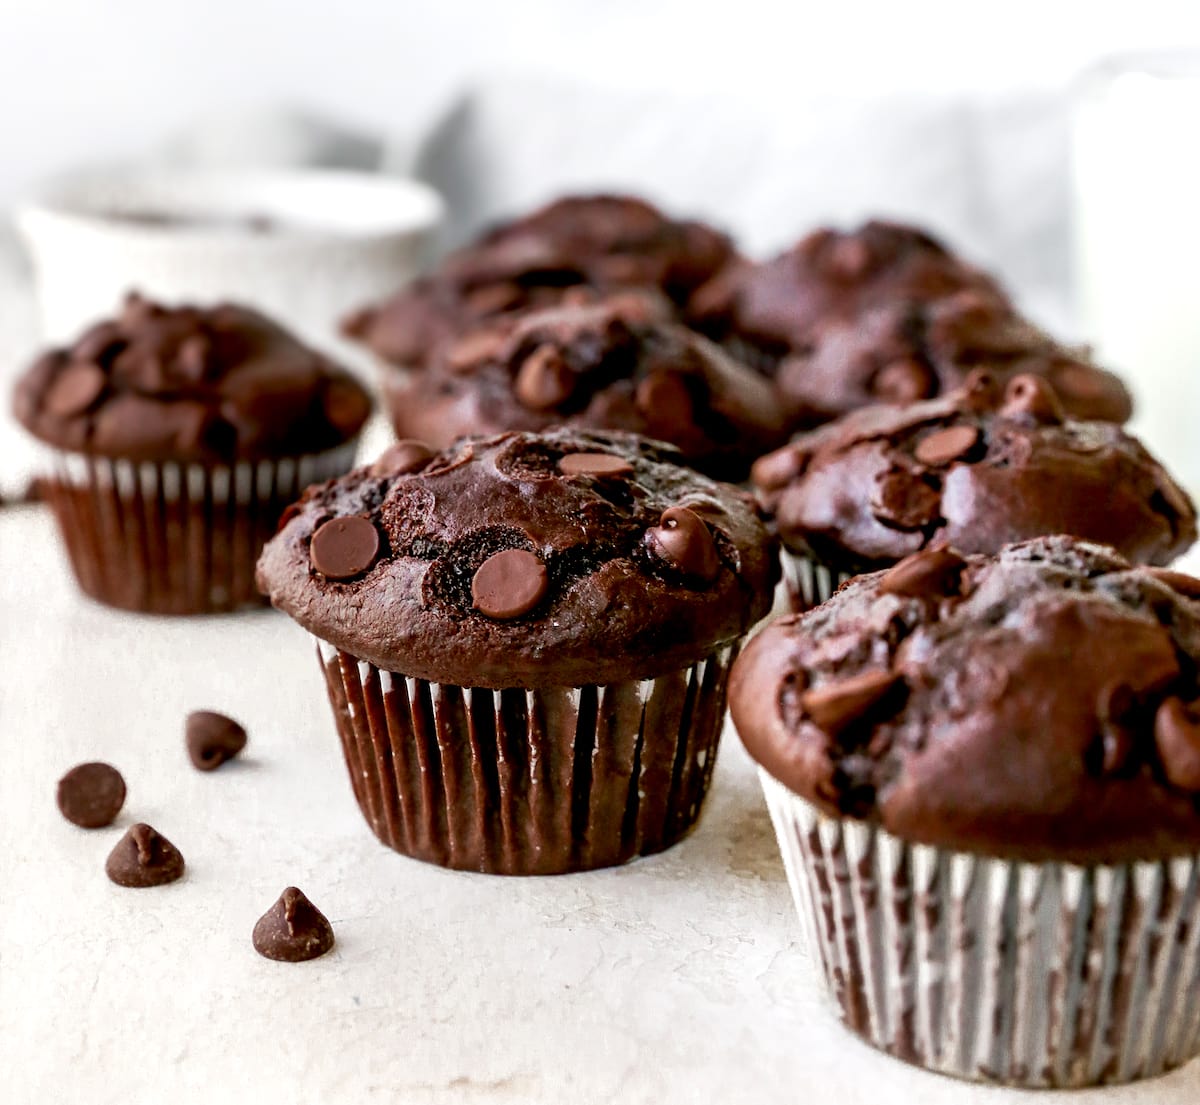 Chocolate muffins with chocolate chips. 